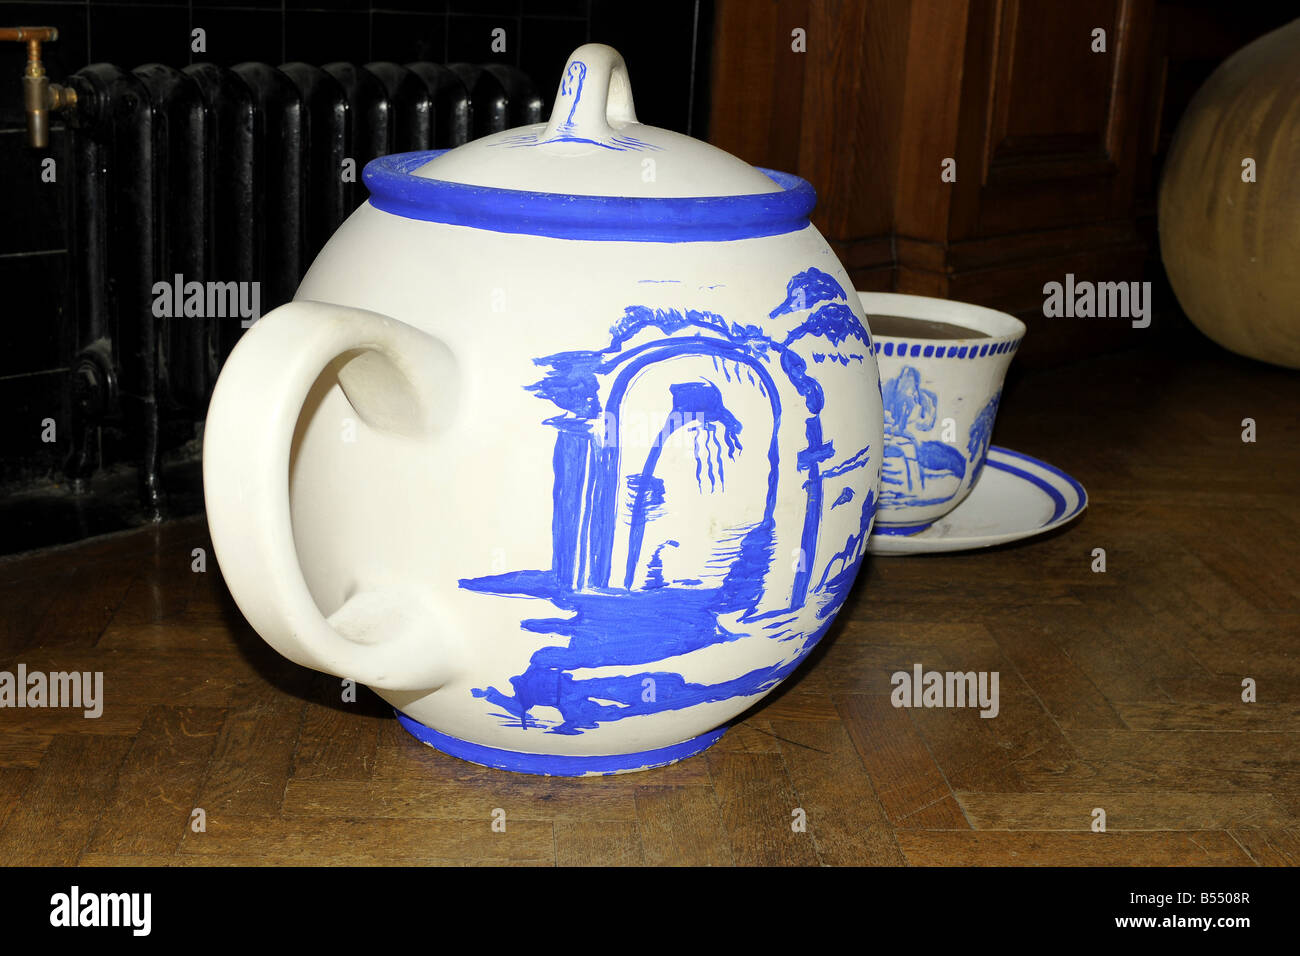 Giant Teapot and cup and saucer used on the Alice in Wonderland film seen at the London Movie Museum Stock Photo